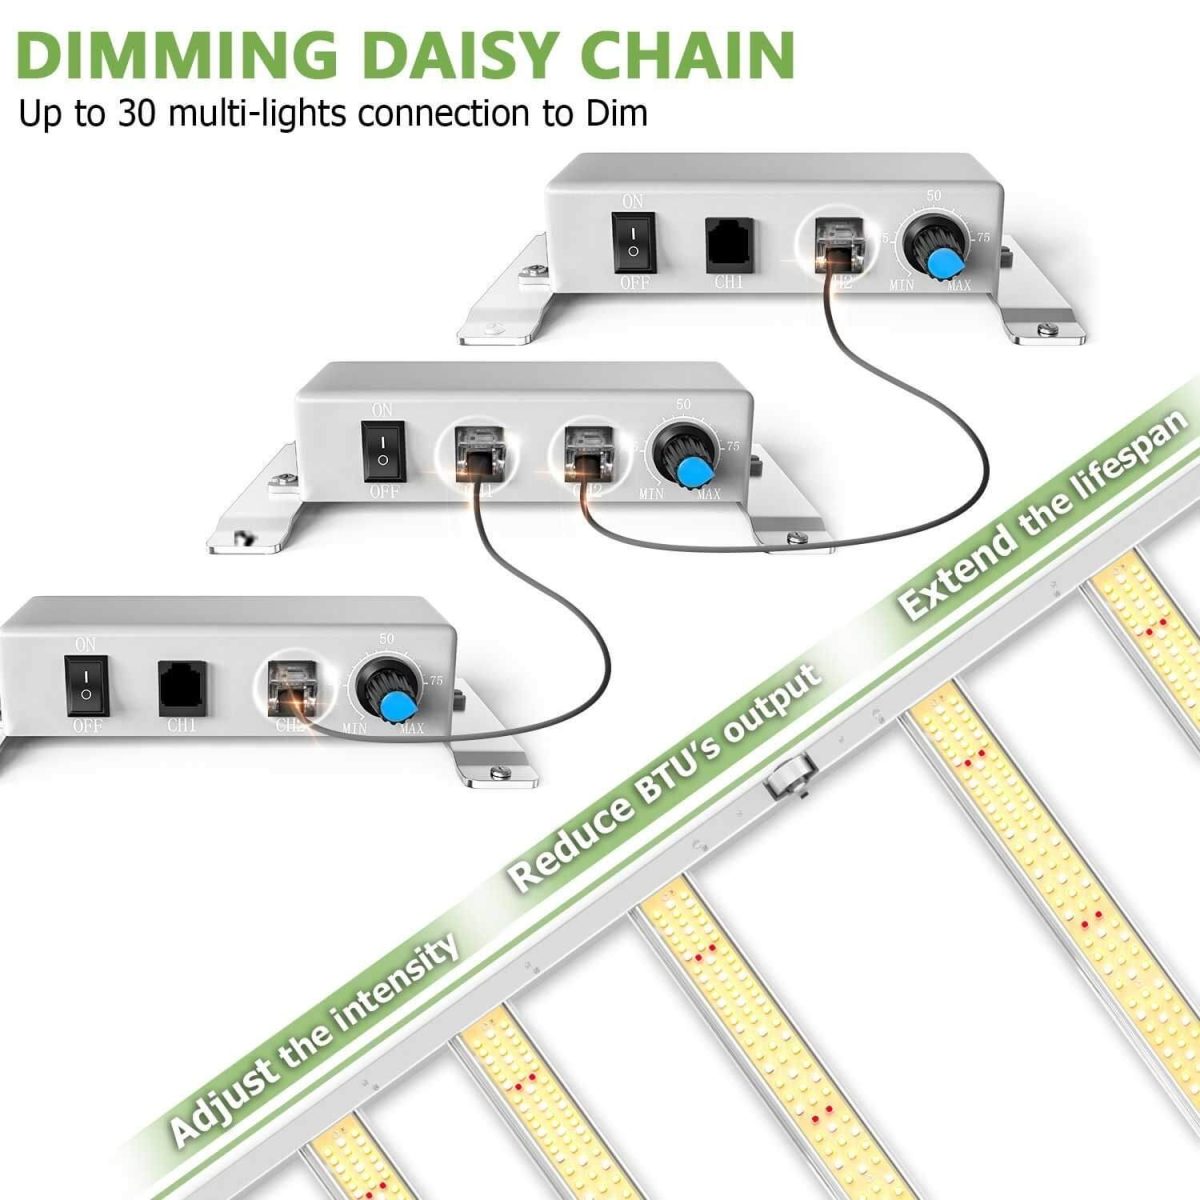 FC6500 LED grow lights support dimming daisy chain function to adjust light intensity of up to 30 LEDs with one dimmer.